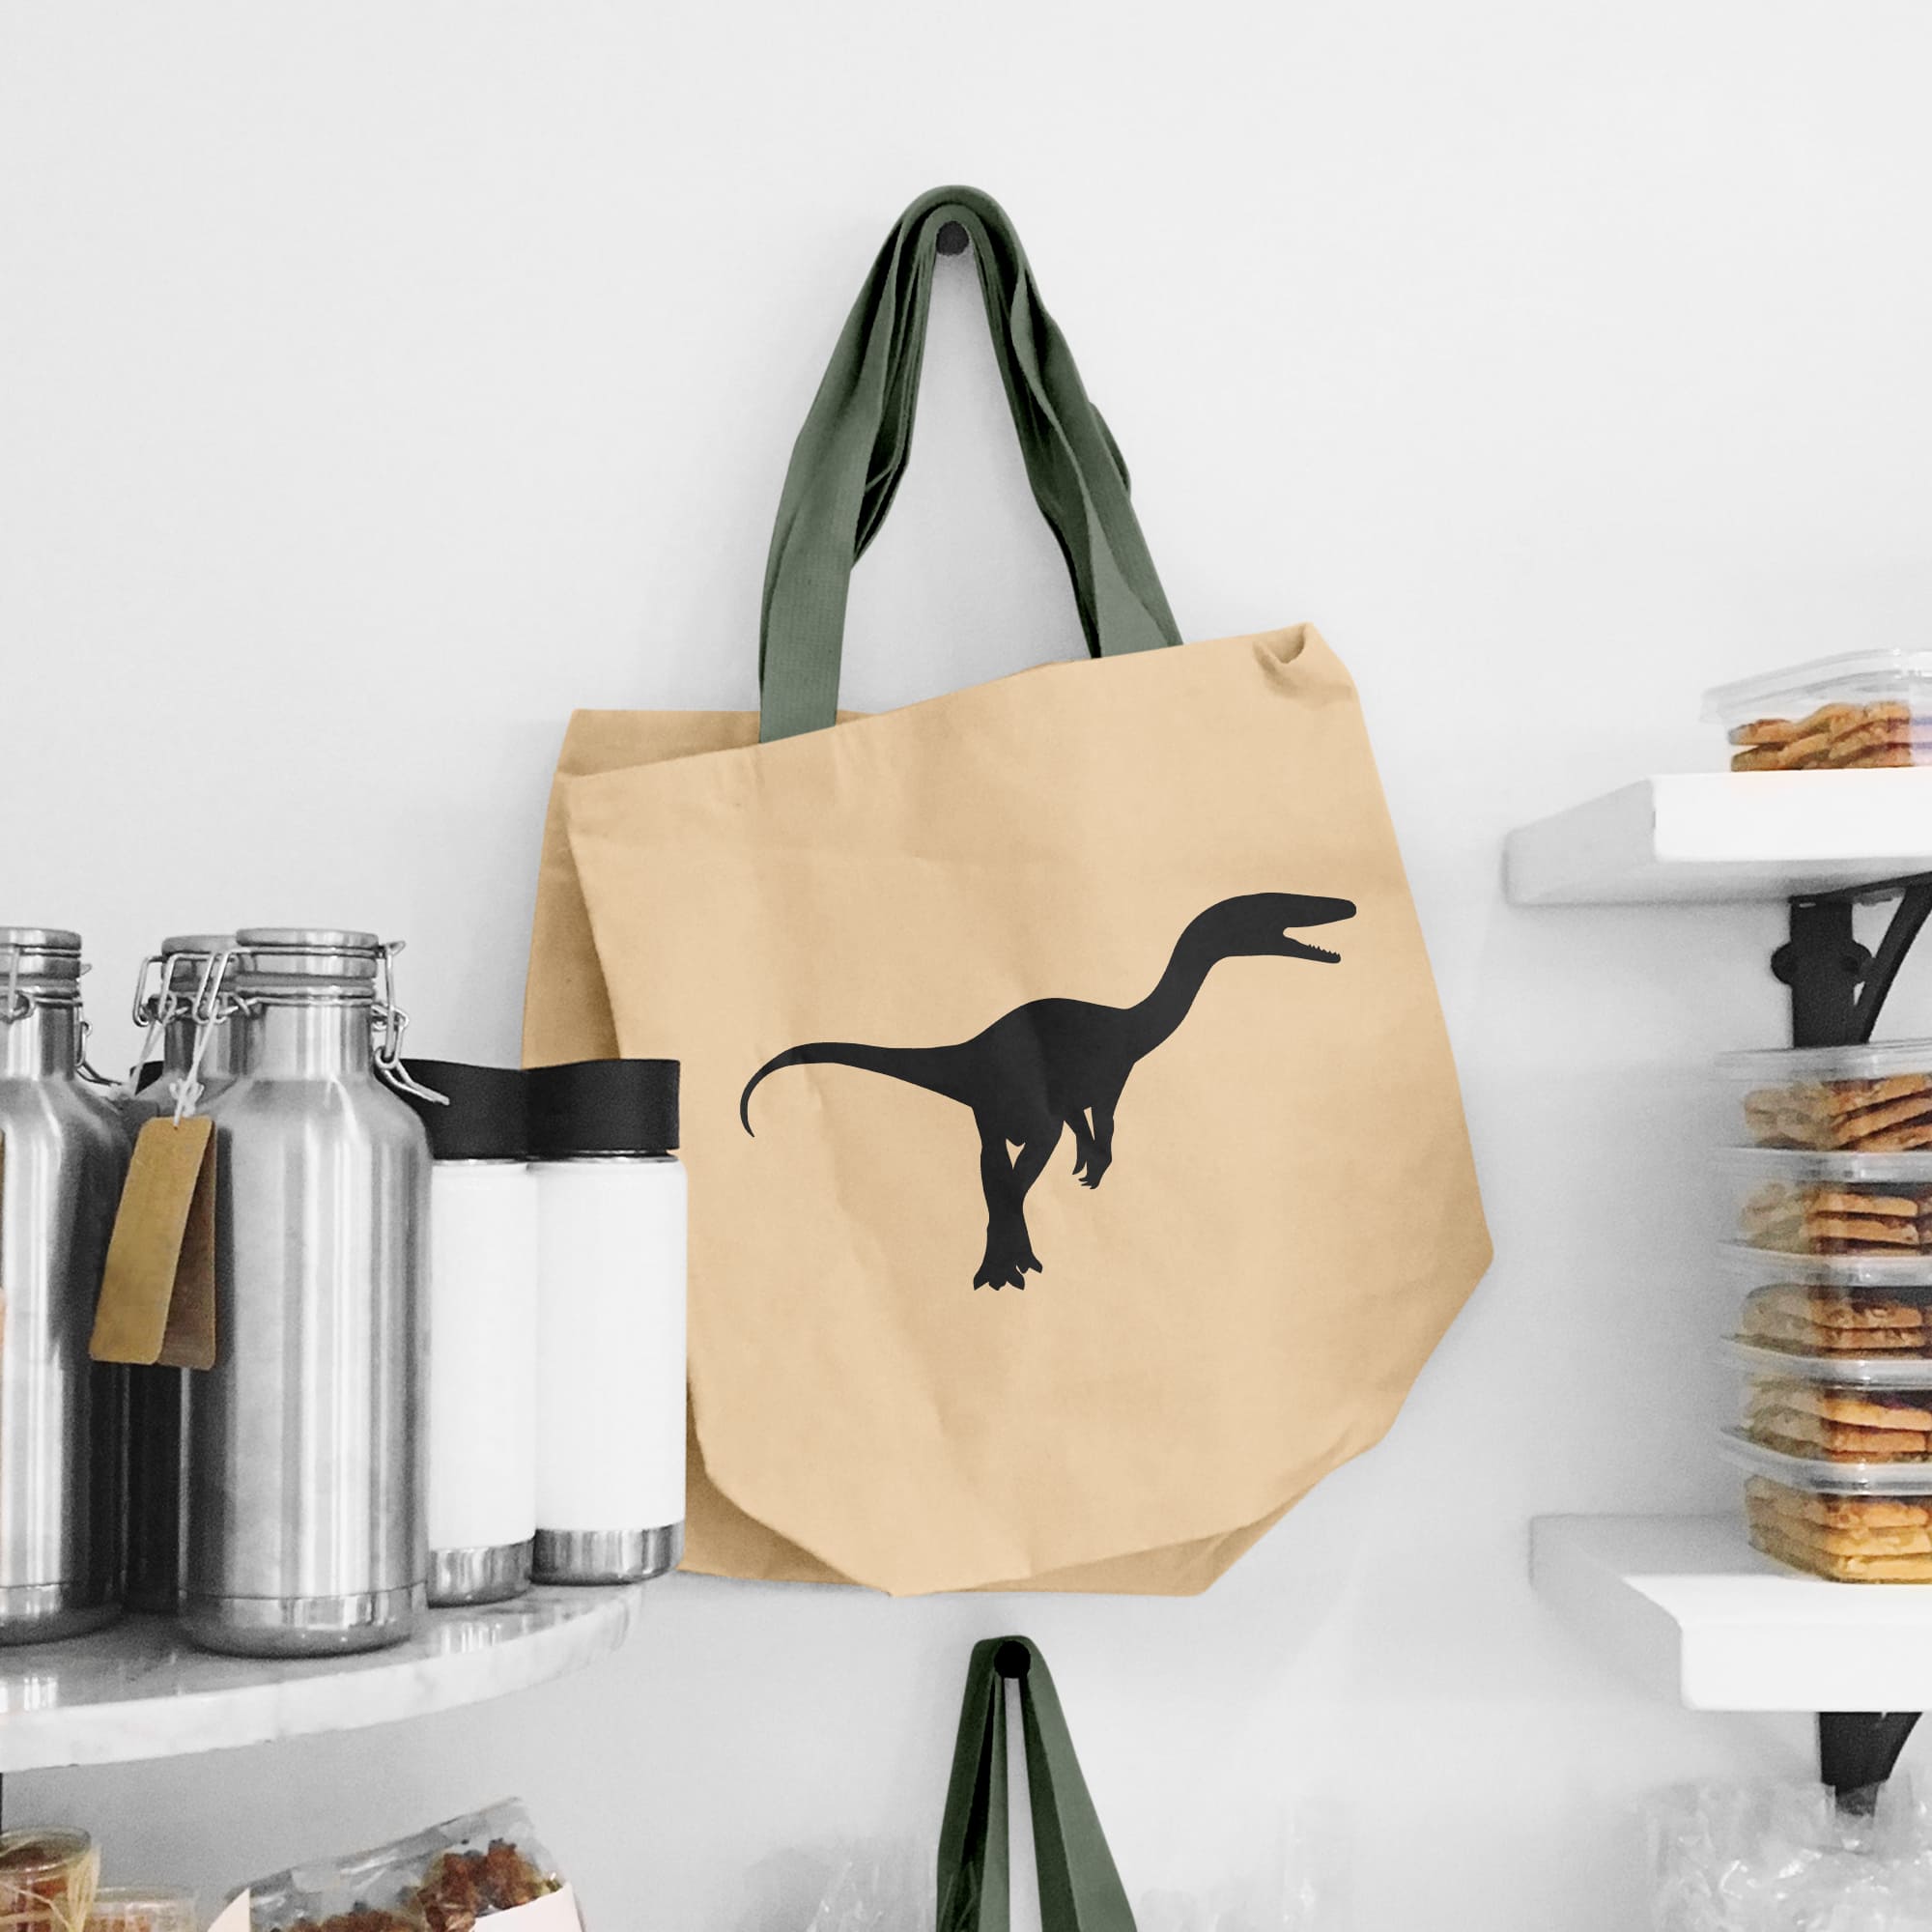 Brown paper bag with a black dinosaur on it.